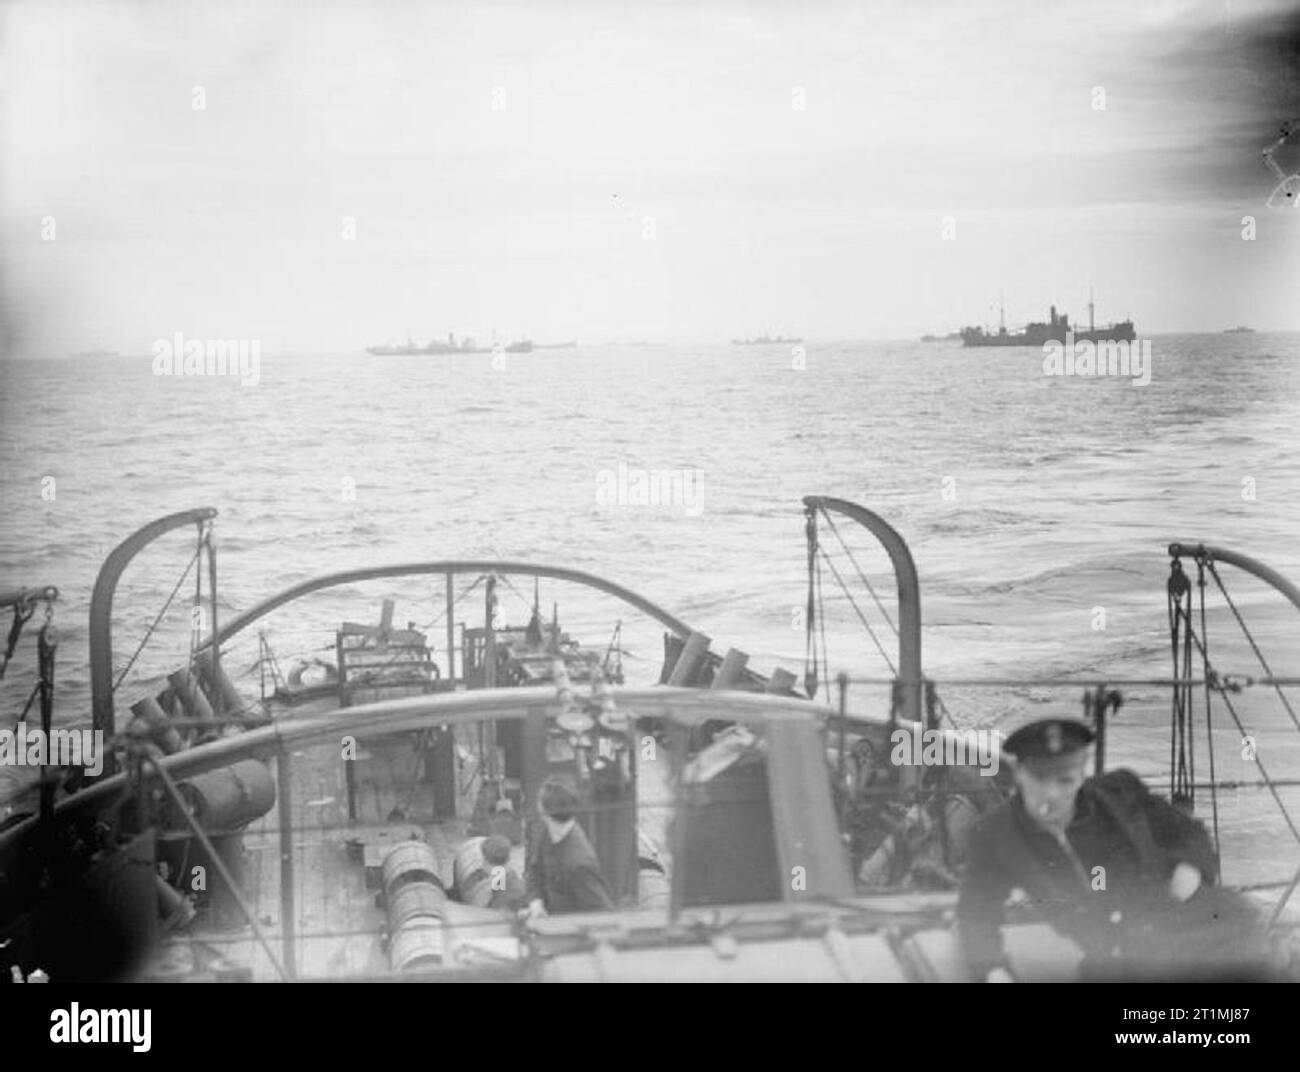 The Battle of the Atlantic 1939-1945 Convoys: Merchant ships in convoy seen from the after deck of a tug. Stock Photo